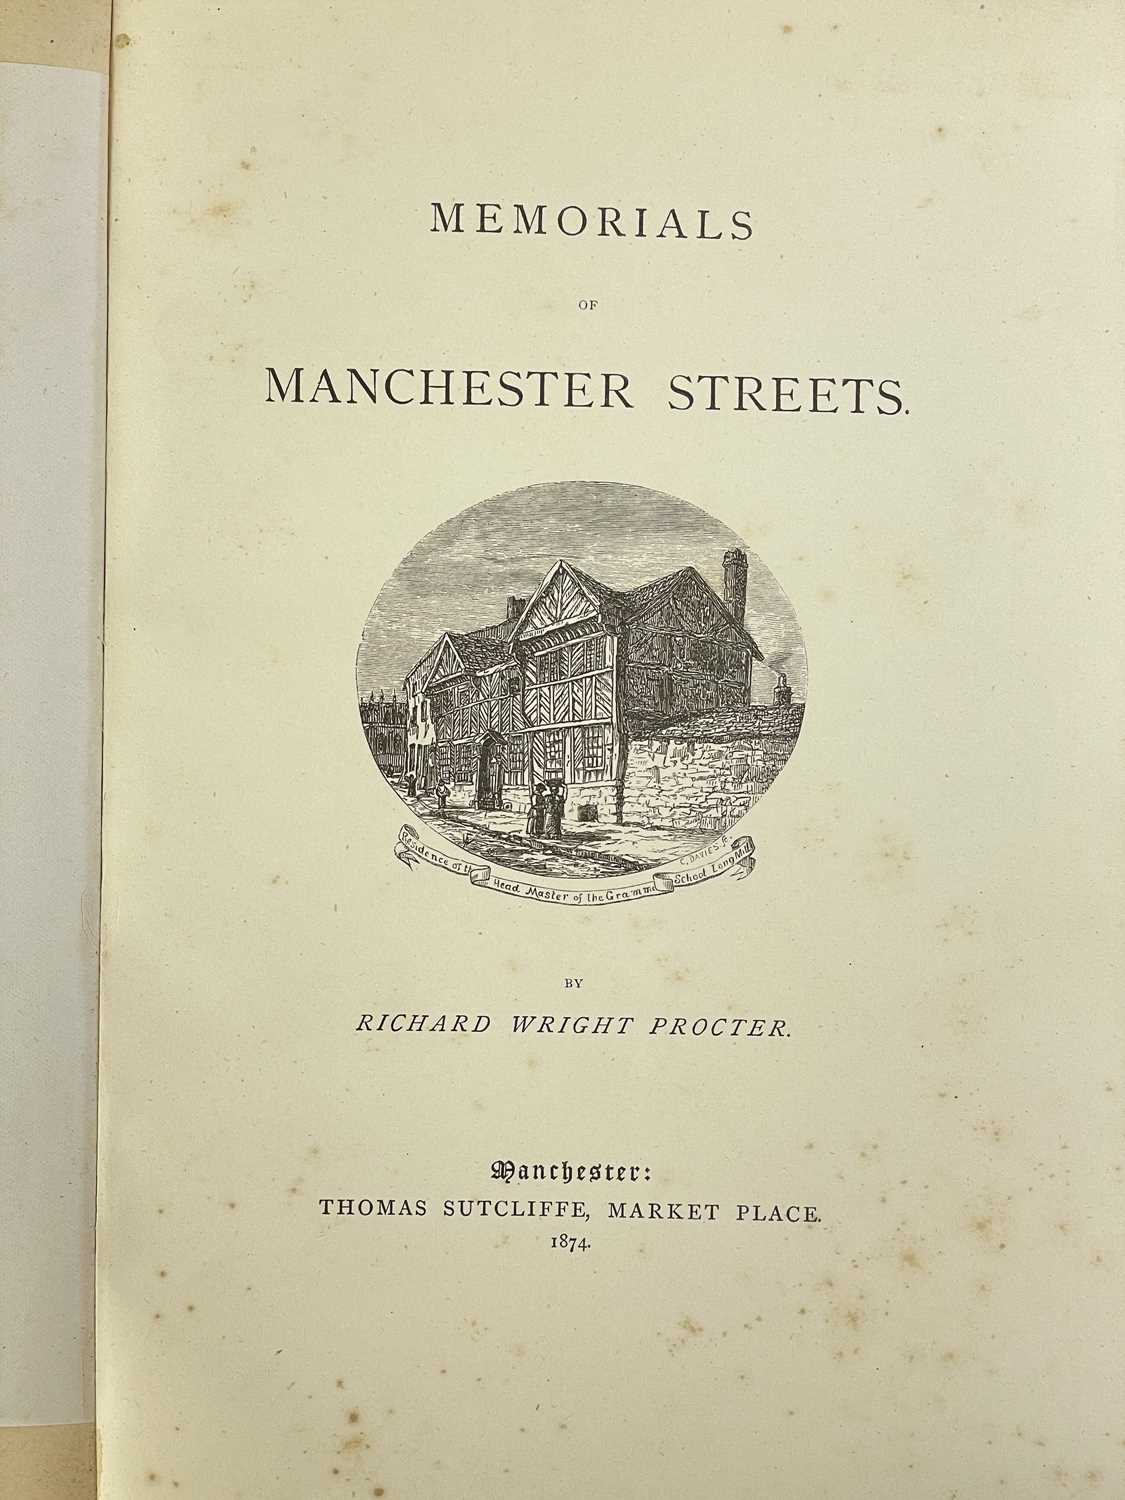 (Manchester) Ware, S. Hibbert; Palmer, J.; Whatton, W. R. 'History of the Foundations in Manchester - Image 5 of 10